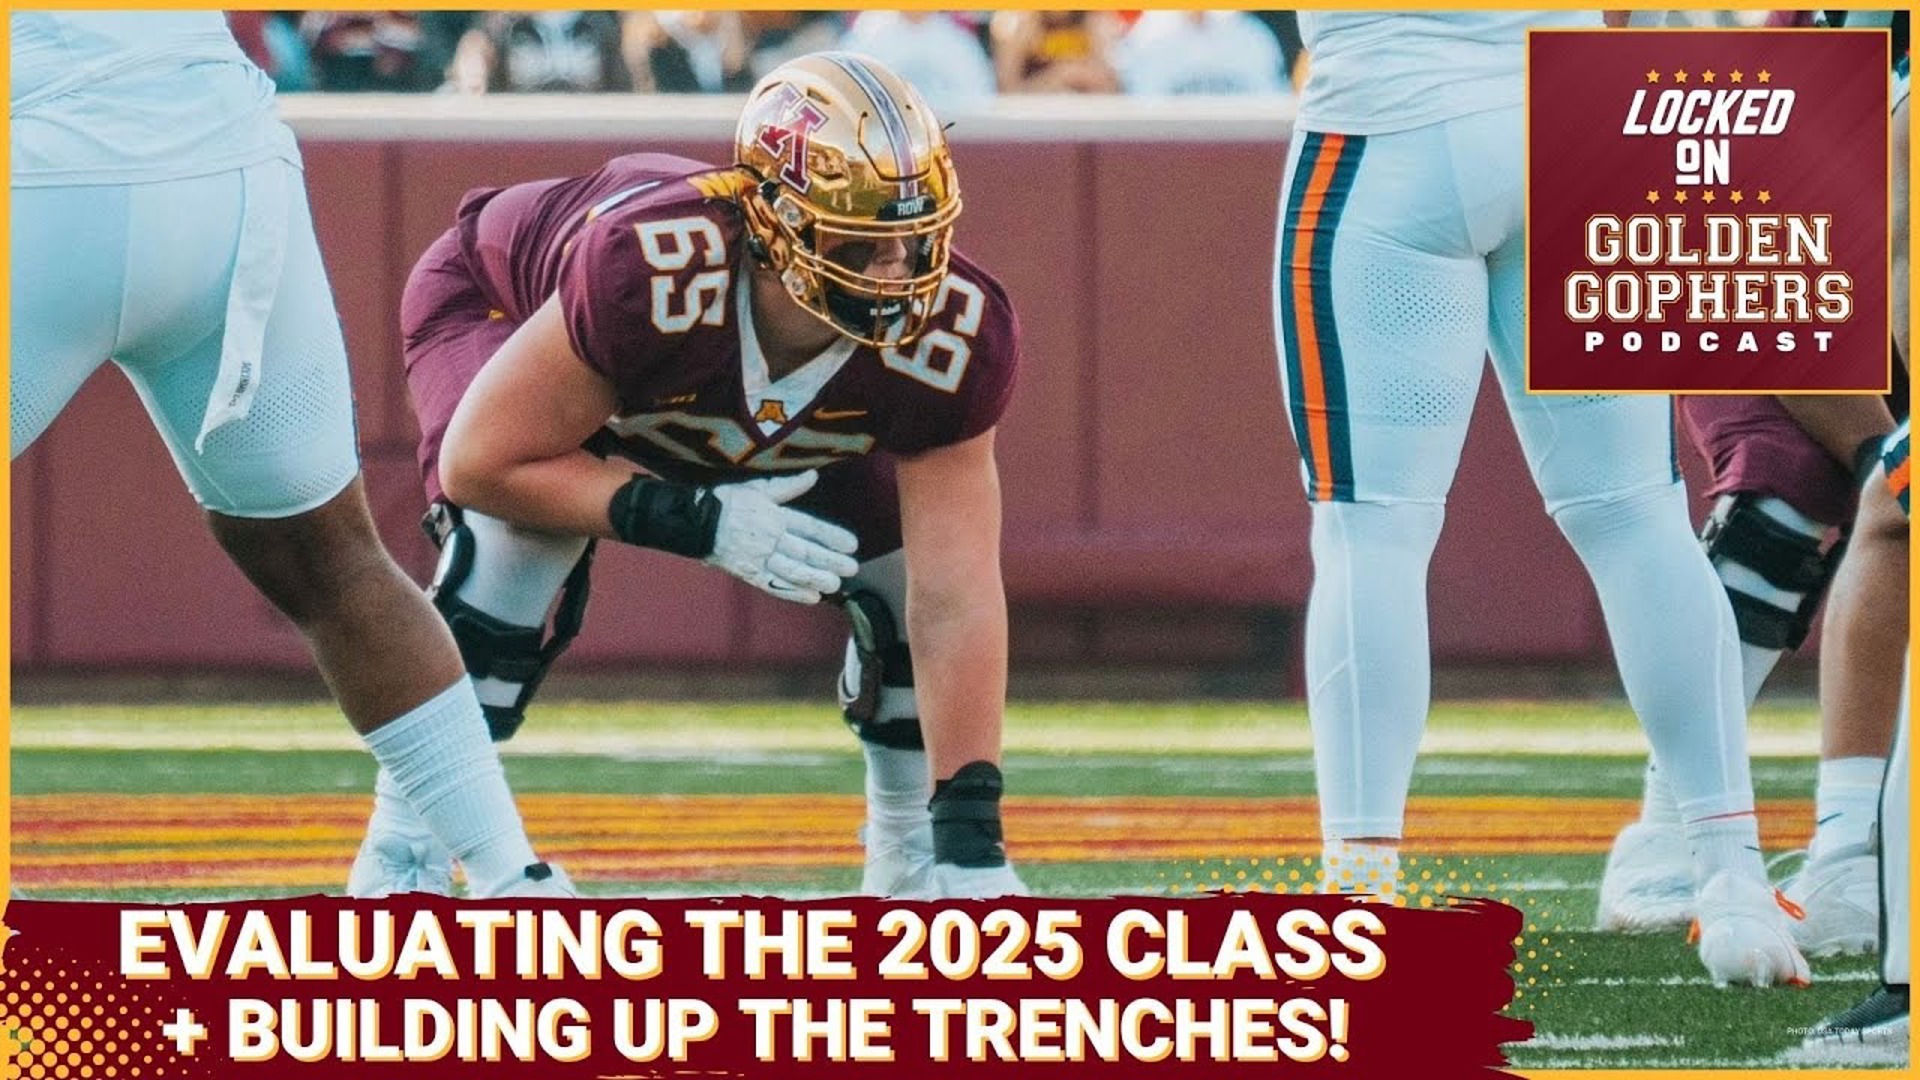 Evaluating the Minnesota Gophers Latest Recruitment Class + Minnesota Building in the Trenches!